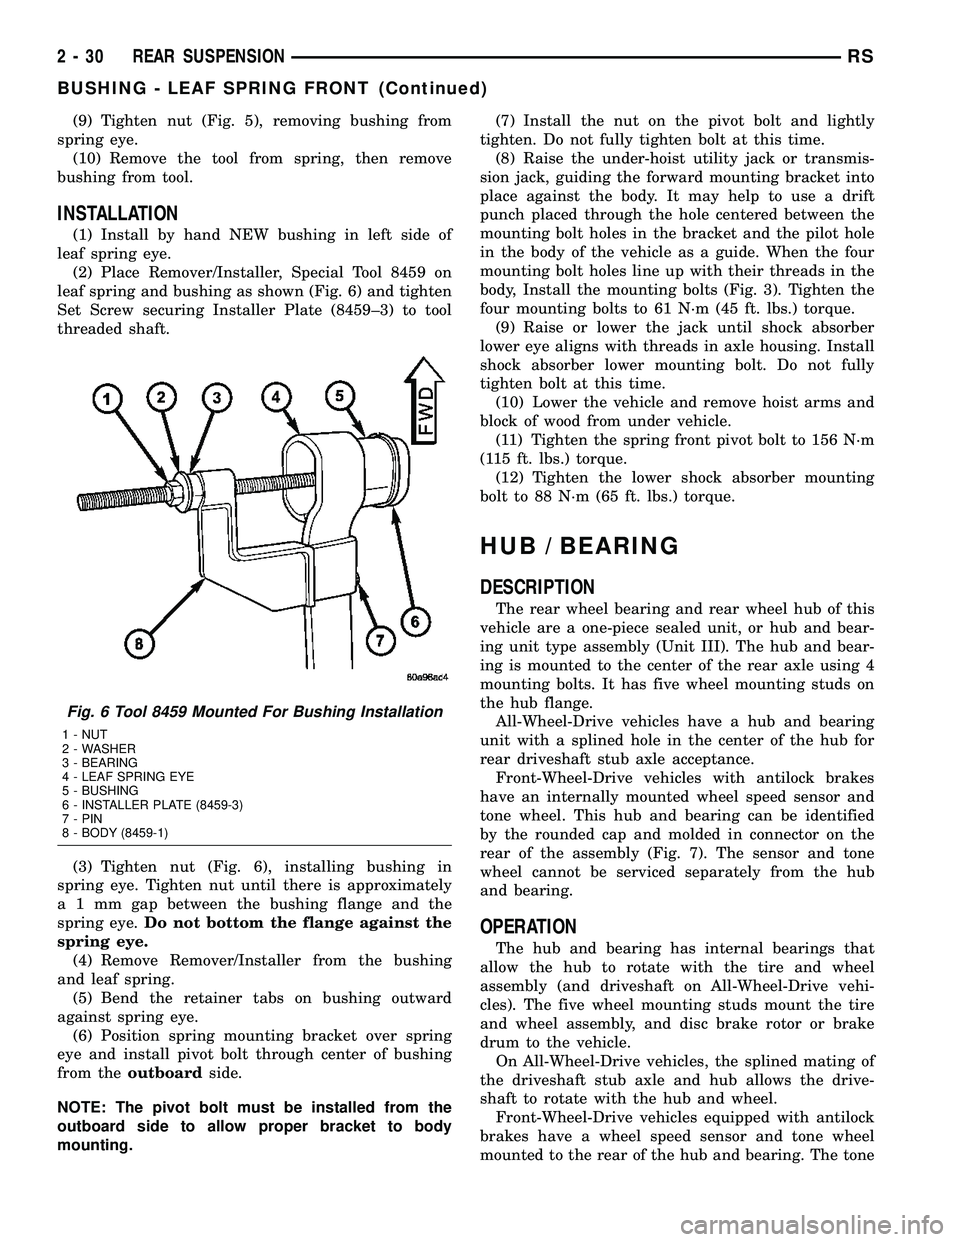 CHRYSLER CARAVAN 2005  Service Manual (9) Tighten nut (Fig. 5), removing bushing from
spring eye.
(10) Remove the tool from spring, then remove
bushing from tool.
INSTALLATION
(1) Install by hand NEW bushing in left side of
leaf spring ey